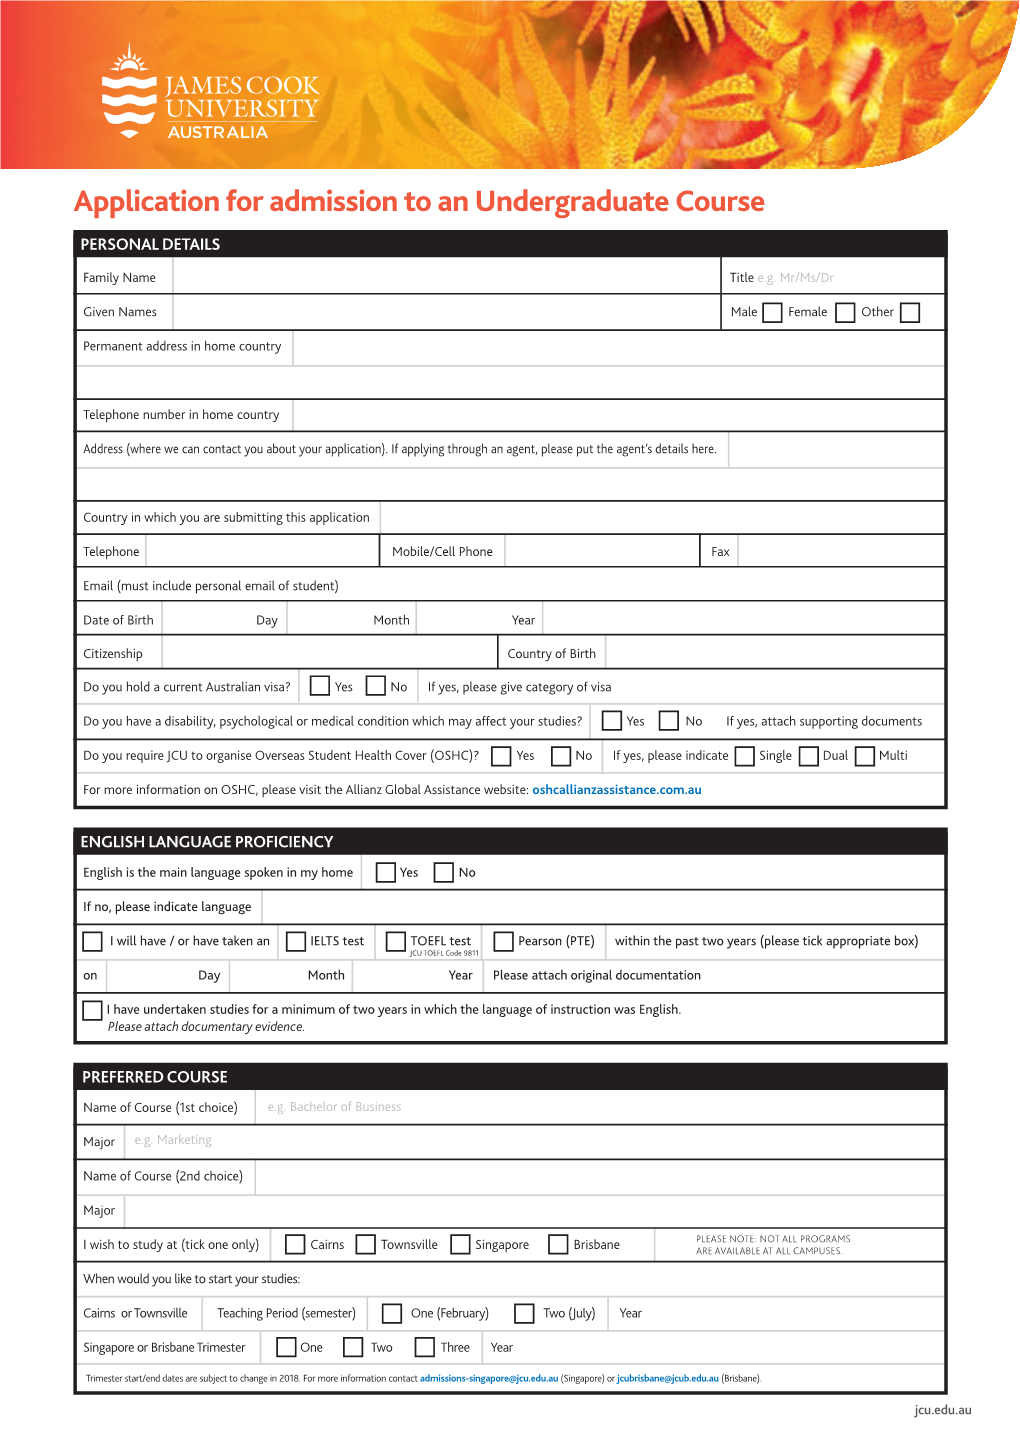 Application for Admission to an Undergraduate Course